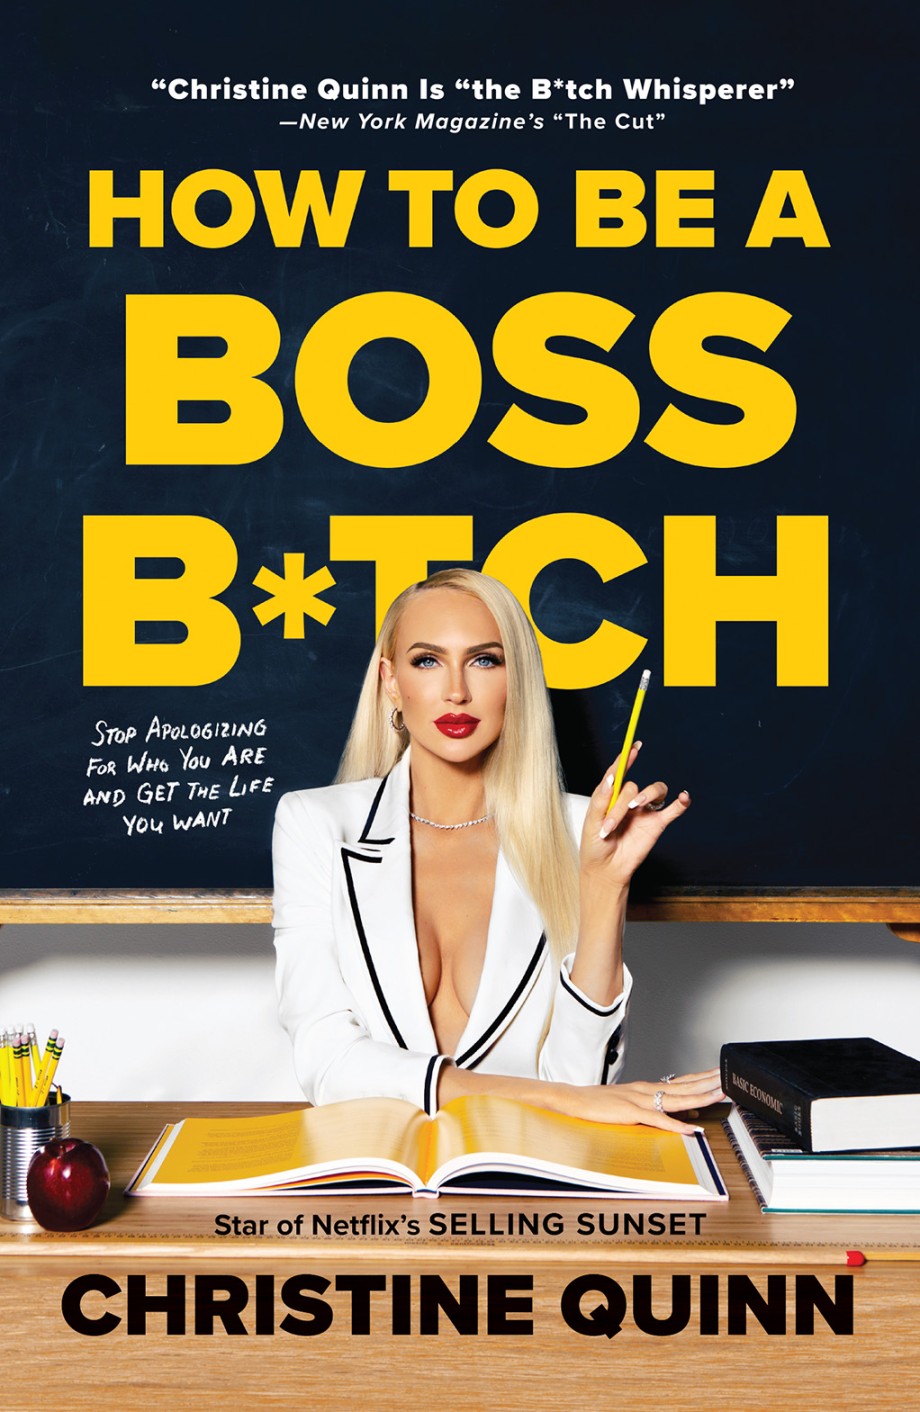 How to Be a Boss B*tch Never Apologize, Build Your Brand, and Succeed on Your Terms